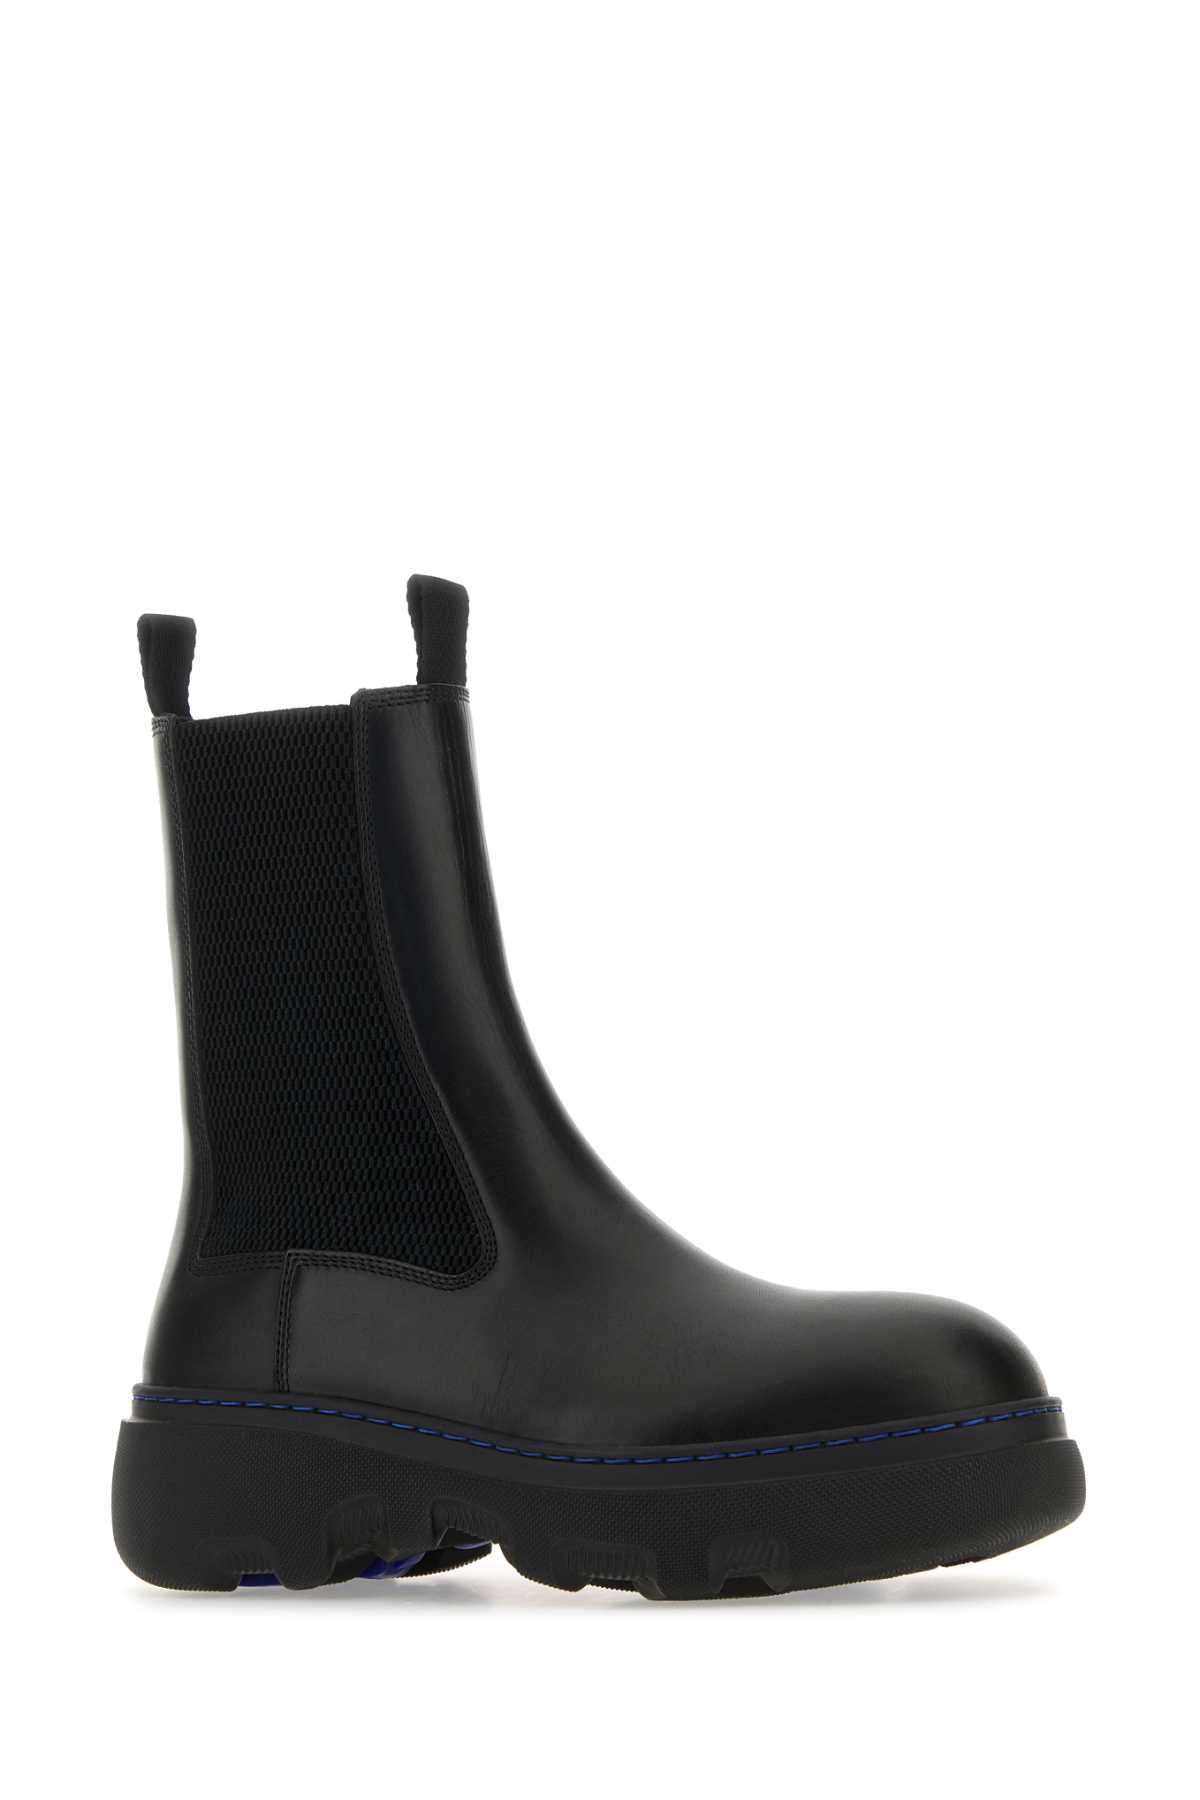 Shop Burberry Black Leather Chelsea Ankle Boots